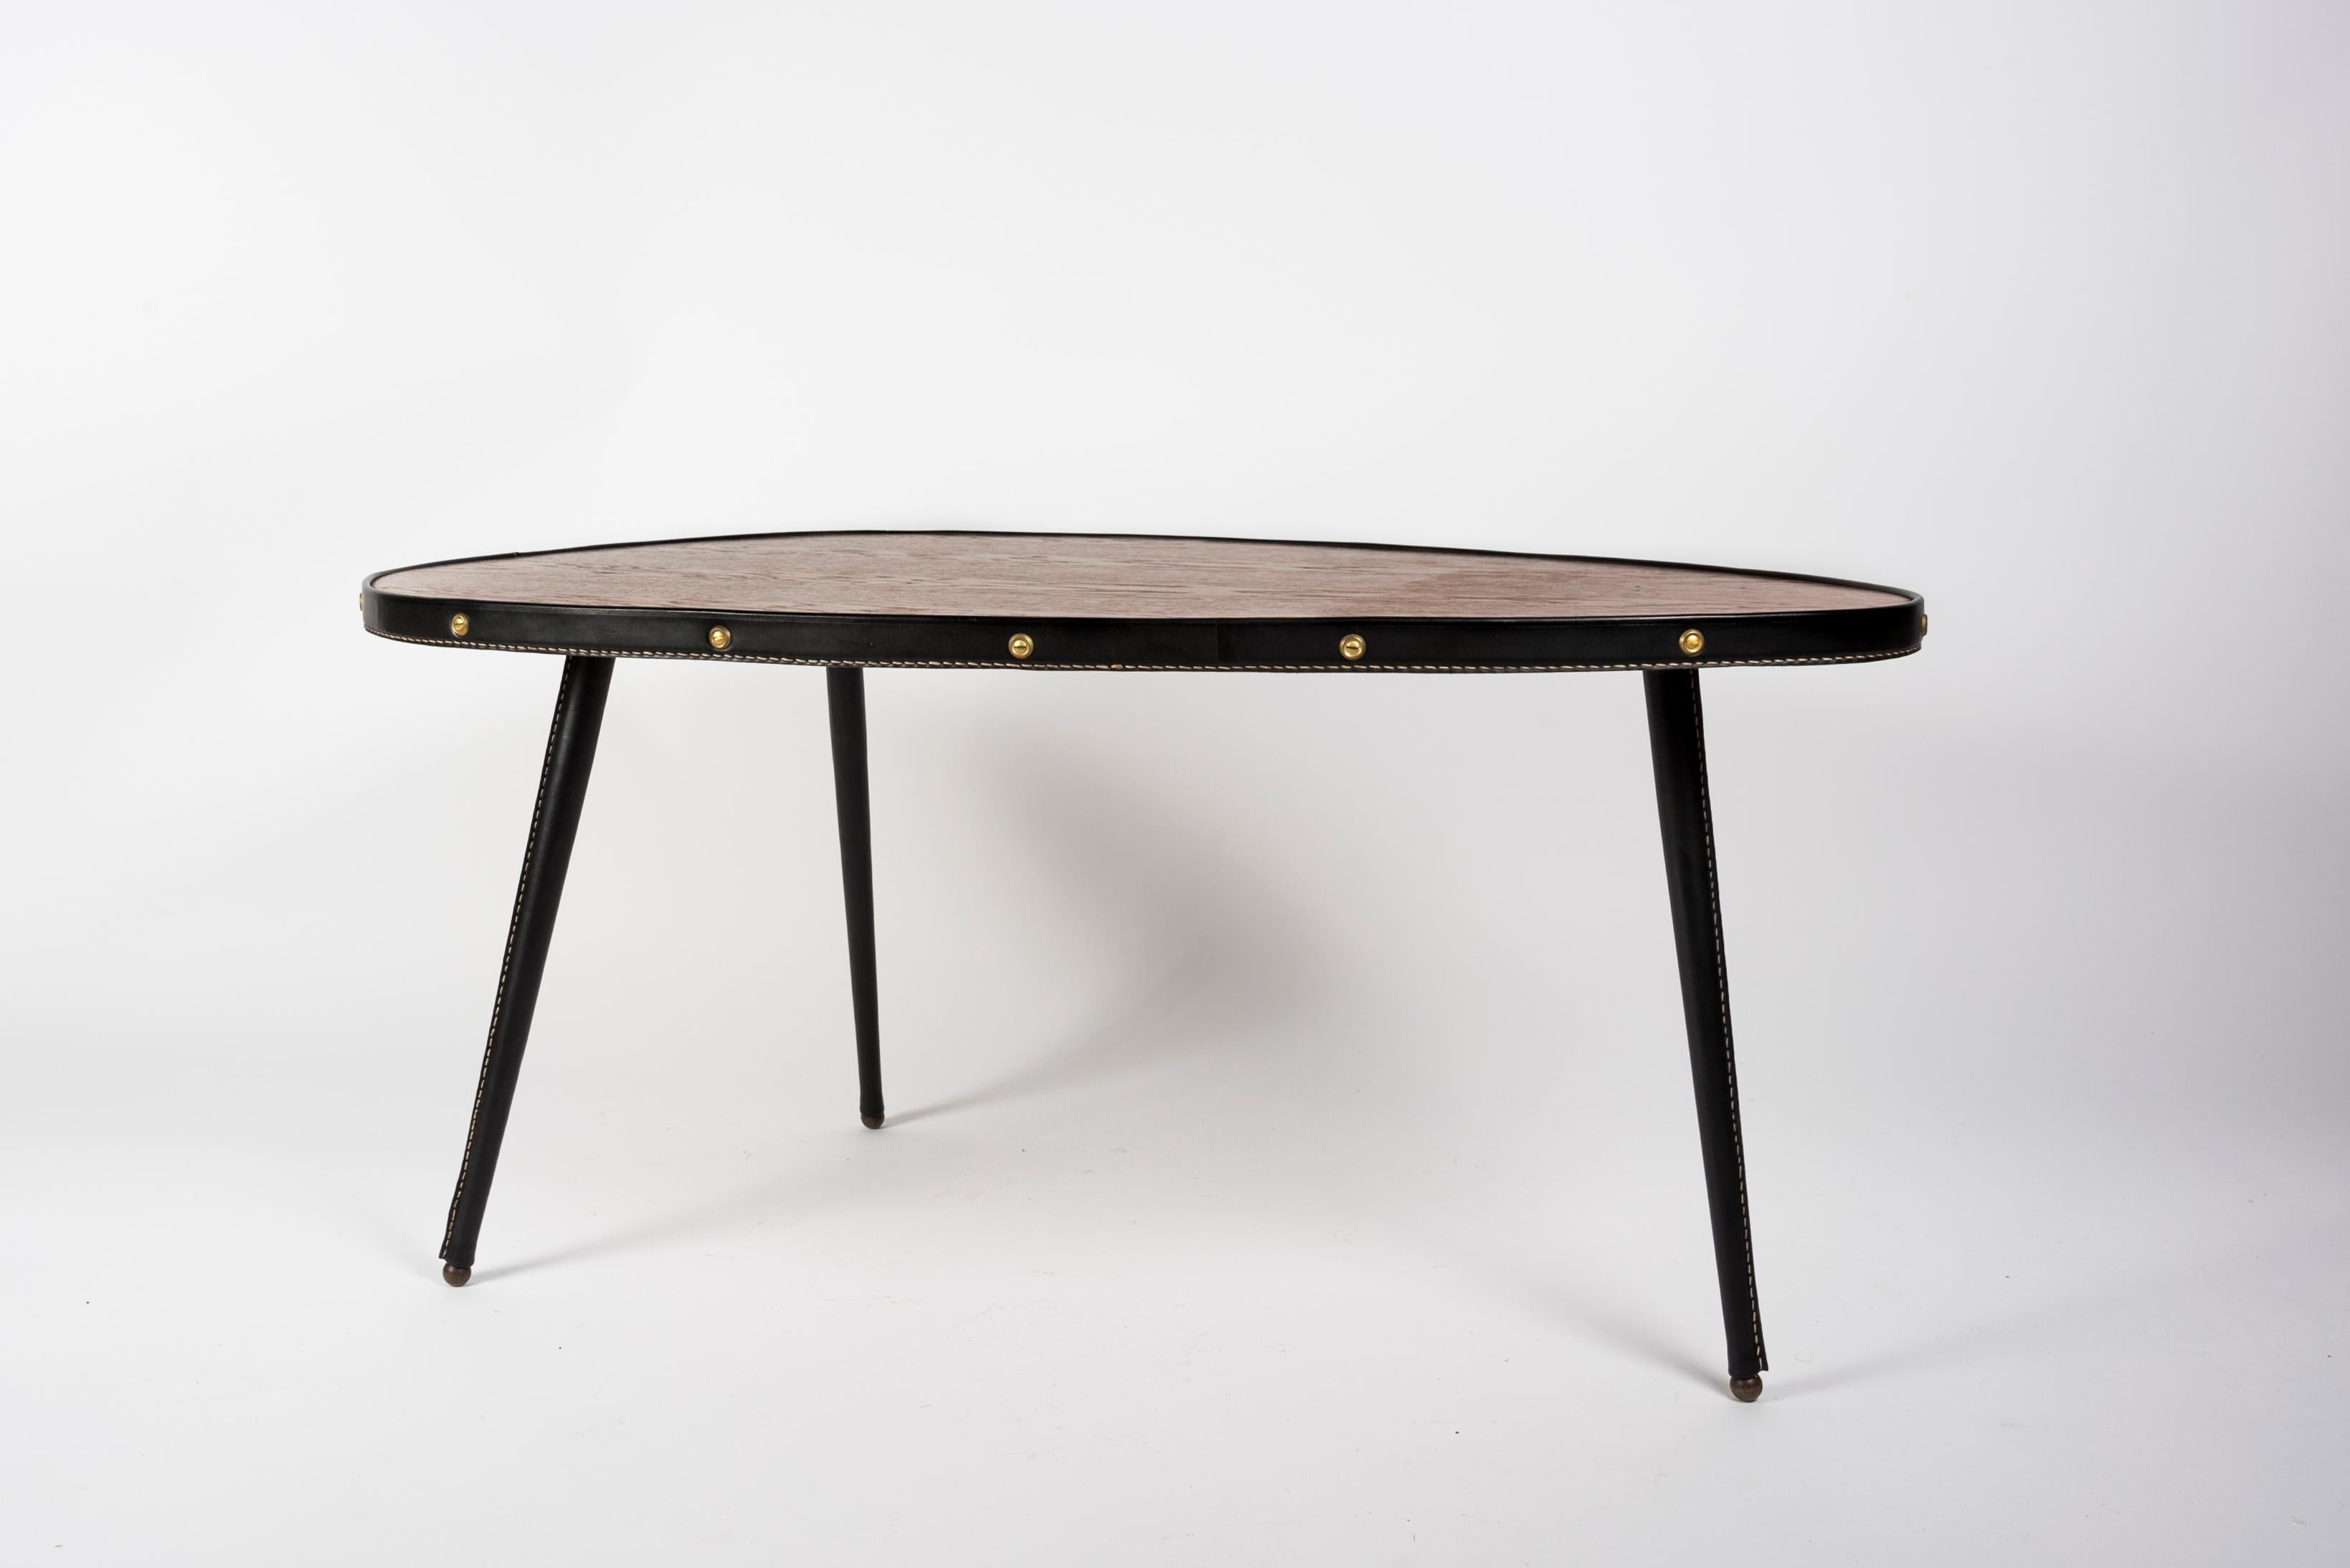 European 1950's Stitched leather free form cocktail table by Jacques Adnet For Sale